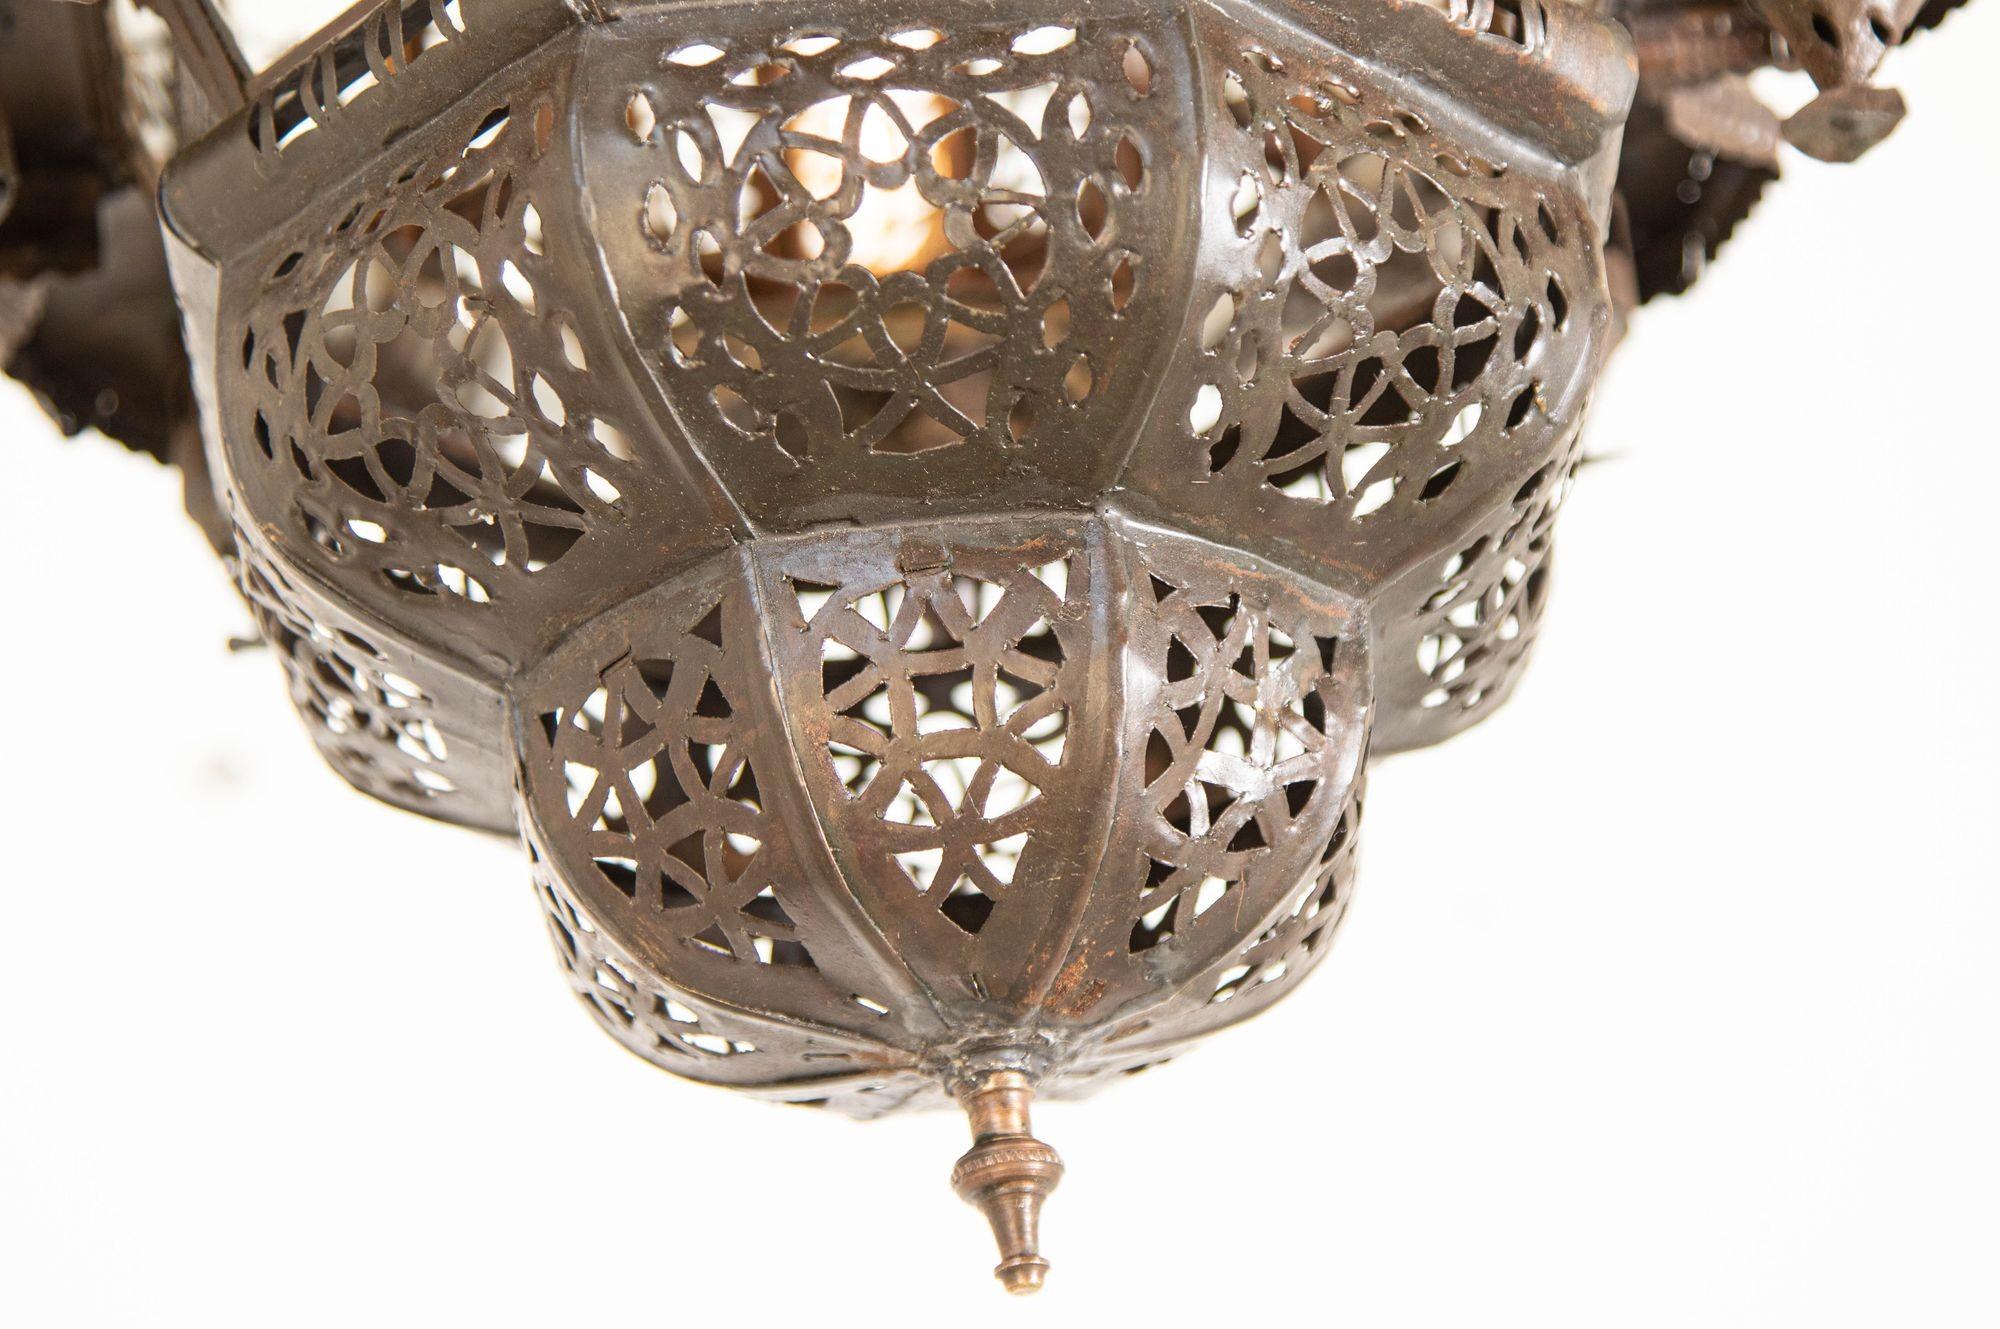 Vintage Moroccan Lantern Mamounia Clear Glass Hand-Crafted Ceiling Light Fixture For Sale 2